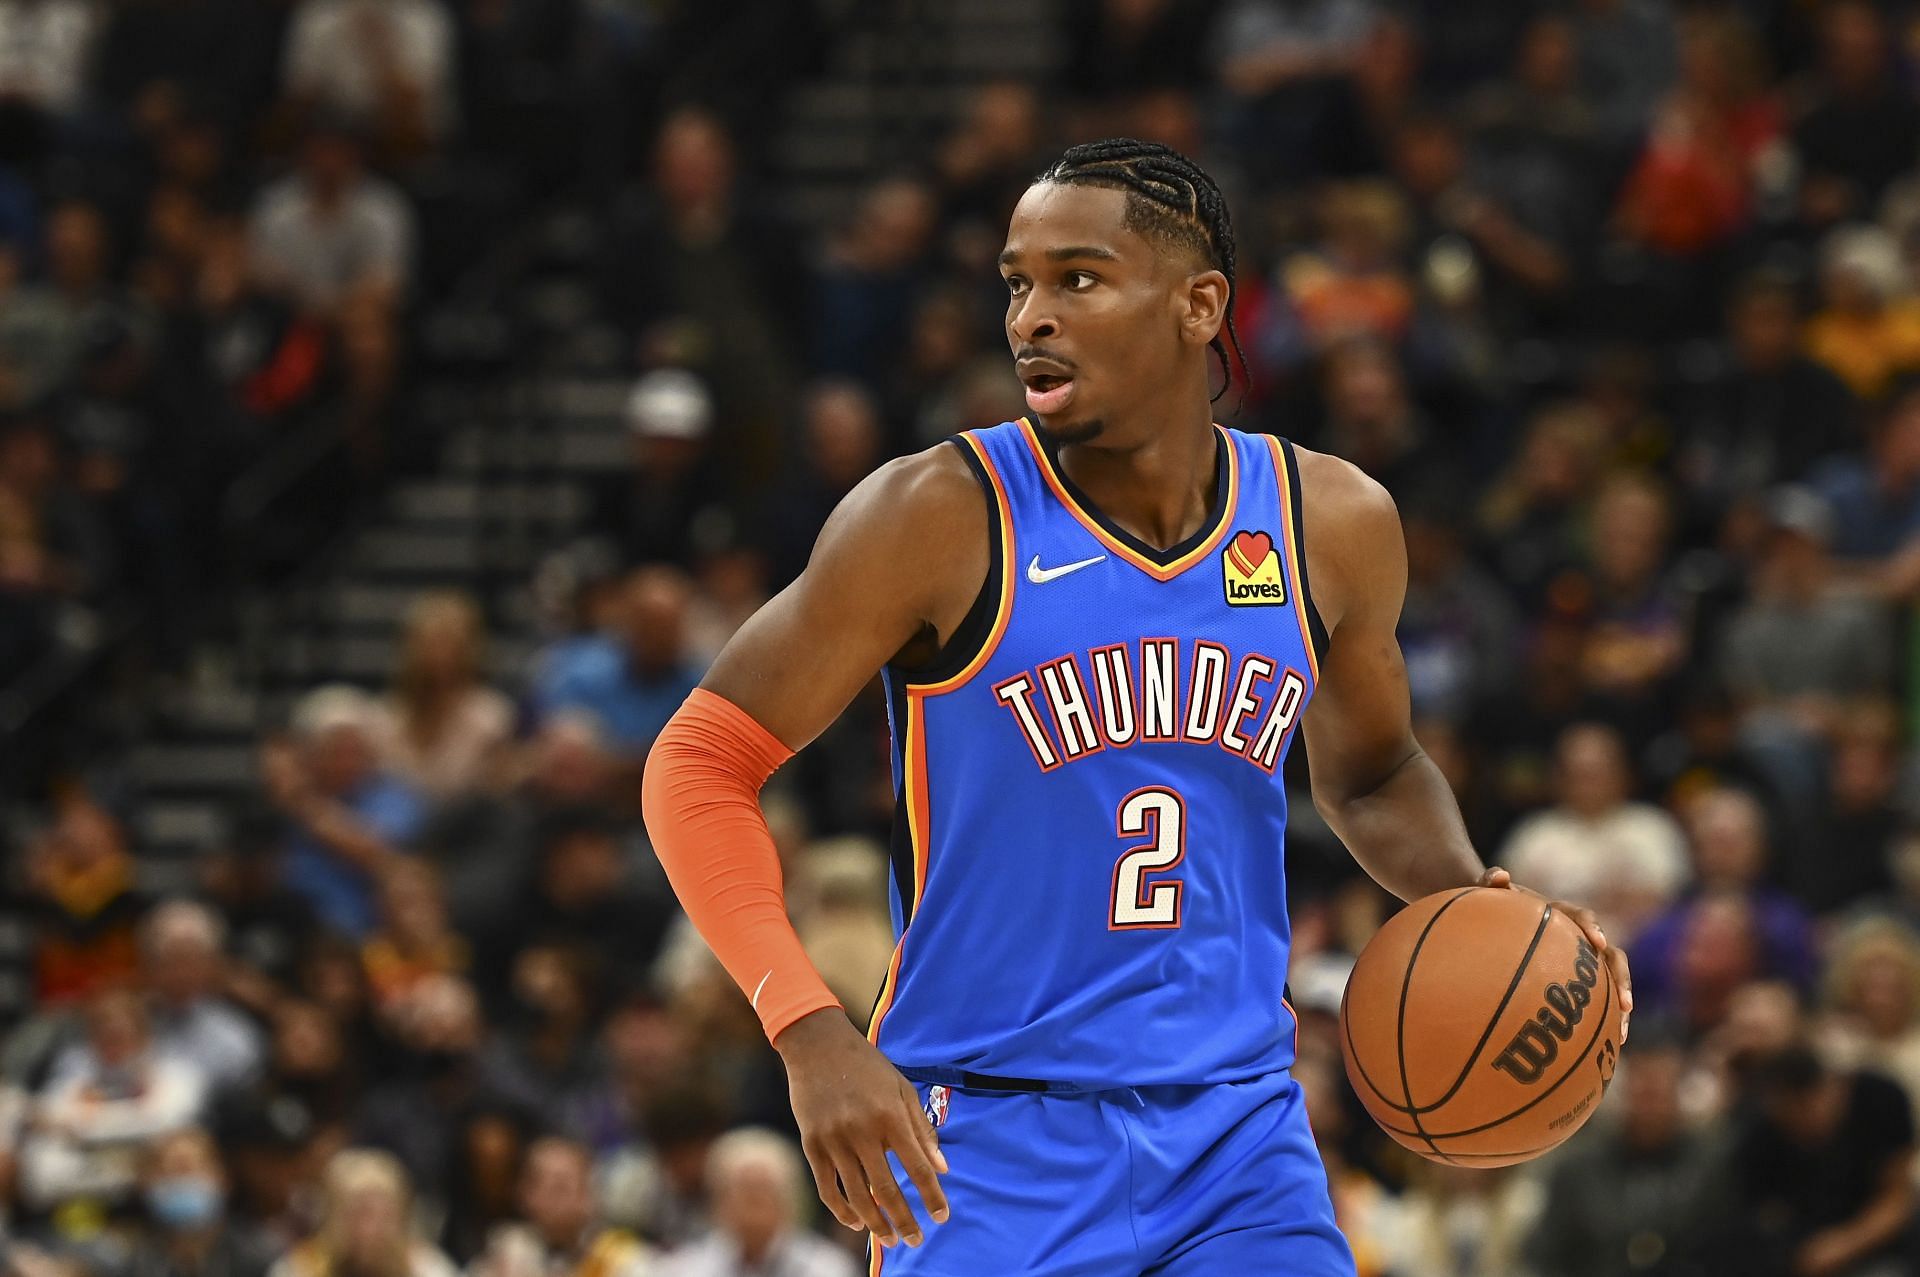 Shai Gilgeous-Alexander of the OKC Thunder is one of the best young players in the NBA.